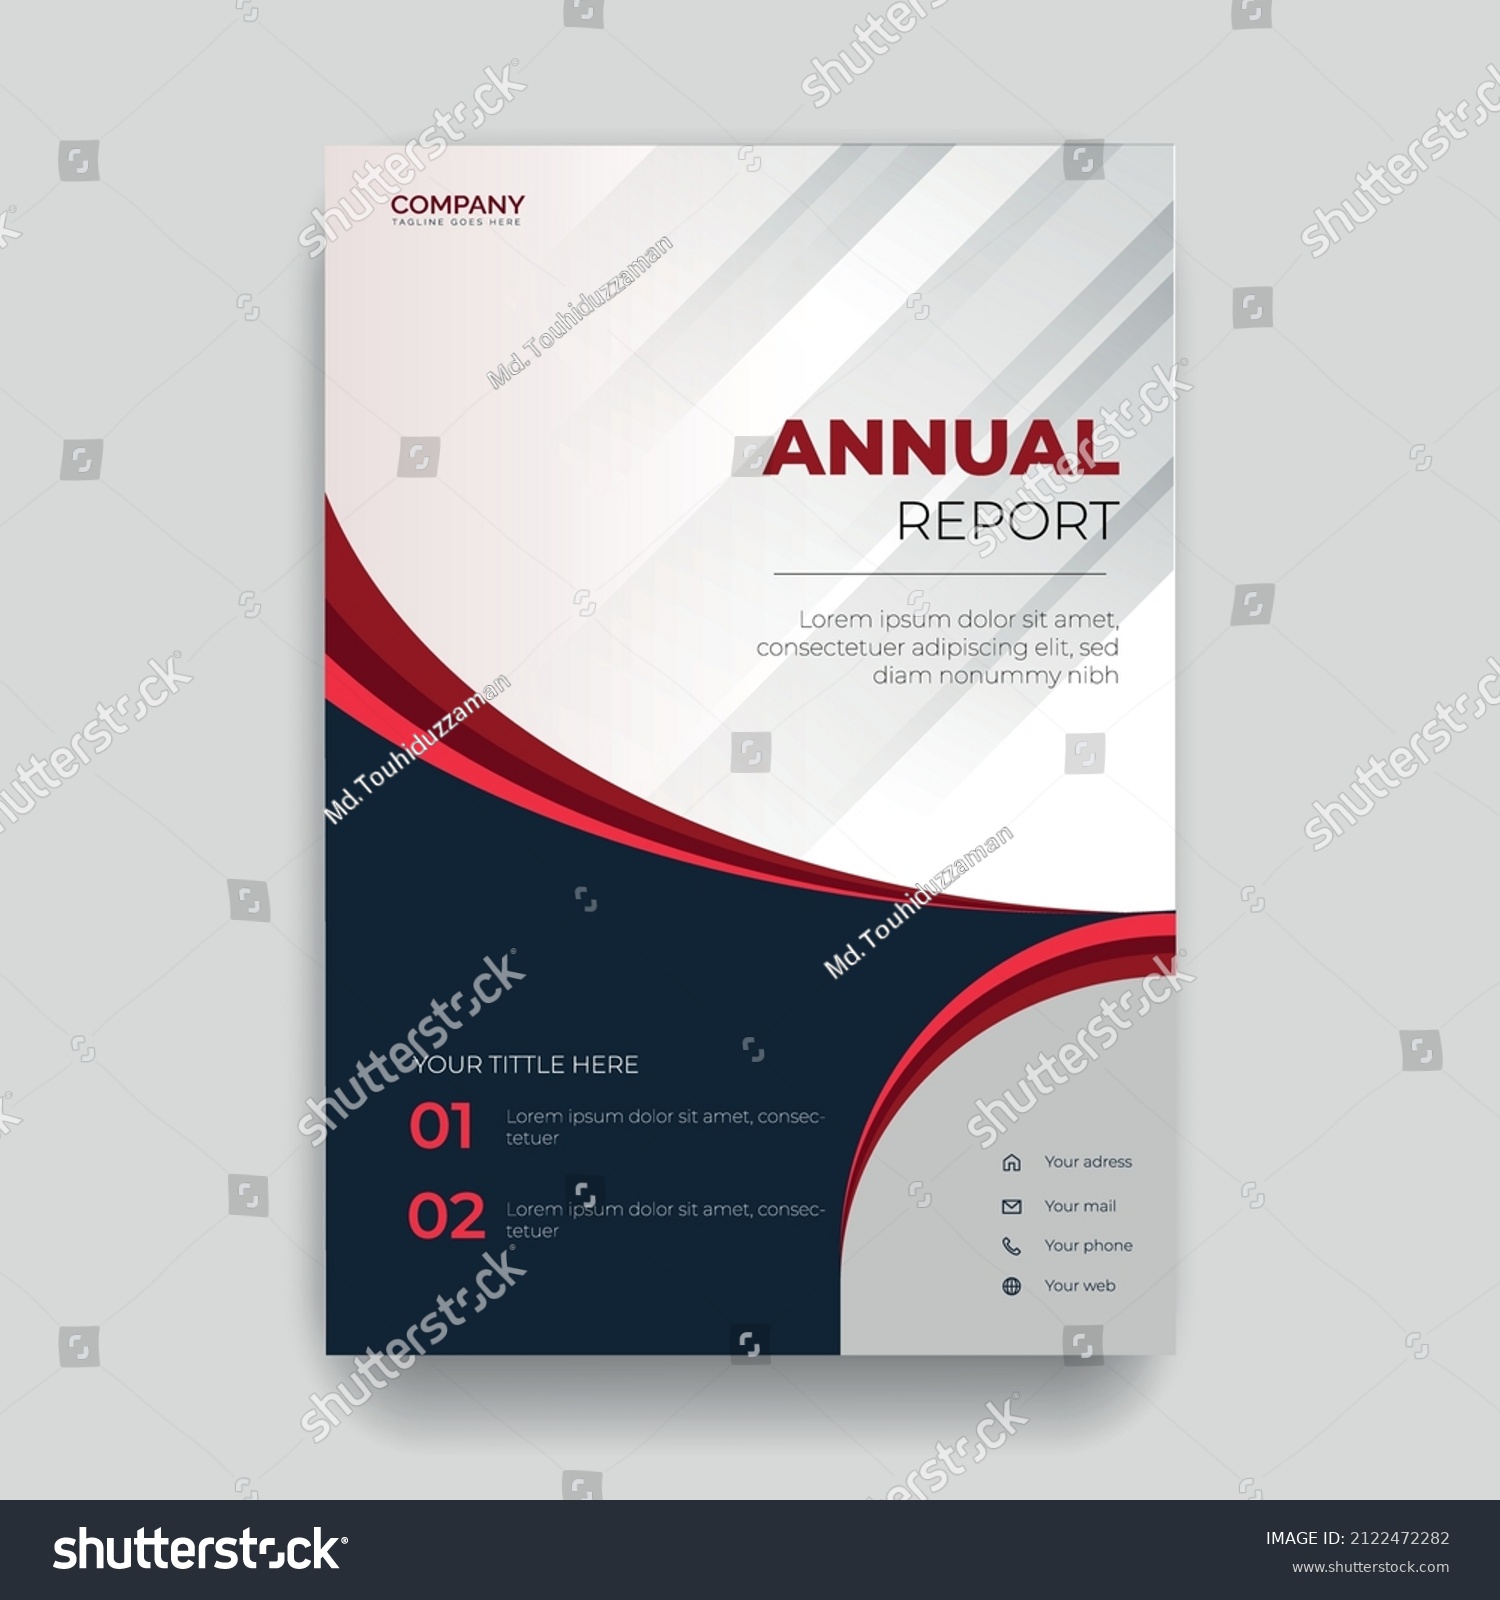 Business Corporate Annual Report Red Cover Stock Vector (Royalty Free ...